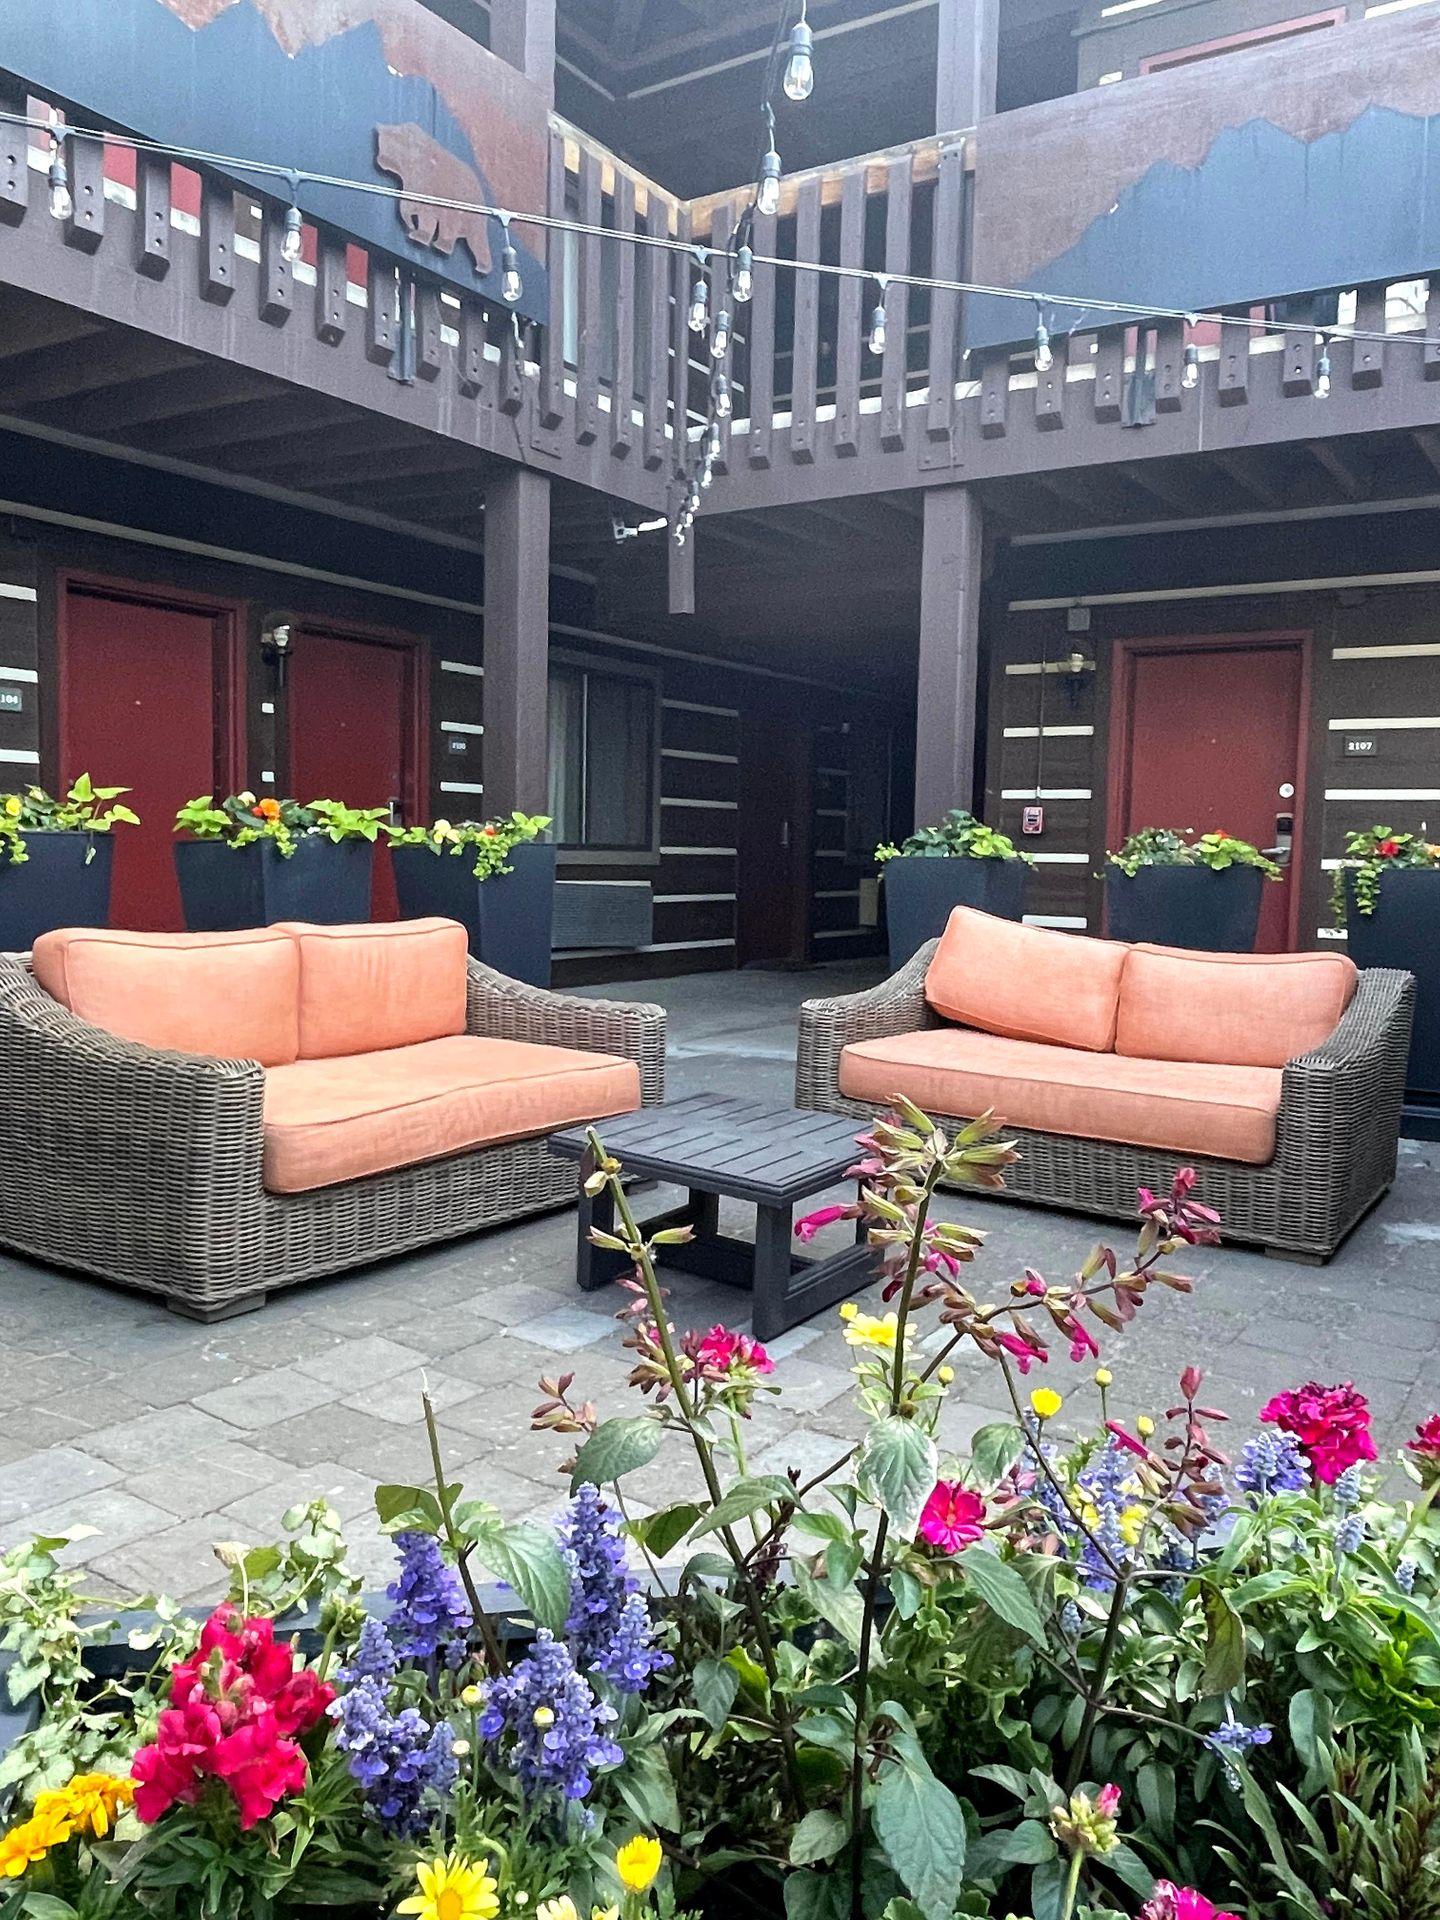 An outdoor seating area with two couches and a small table. It is surrounded by a display of colorful flowers.